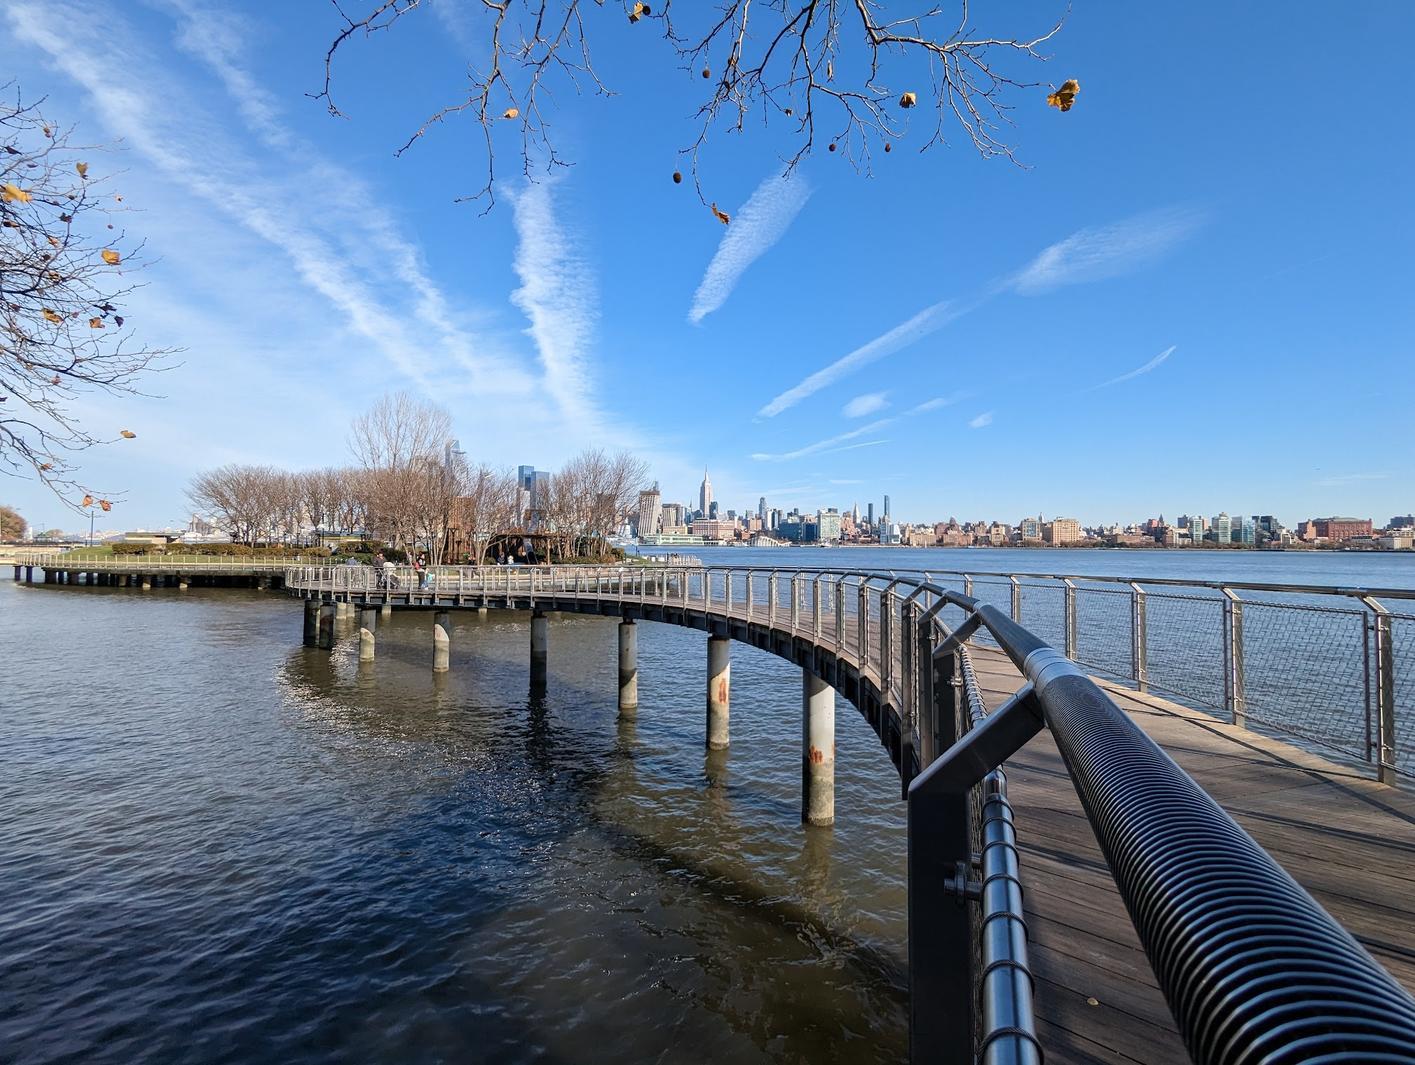 13-facts-about-local-legends-and-folklore-in-hoboken-new-jersey